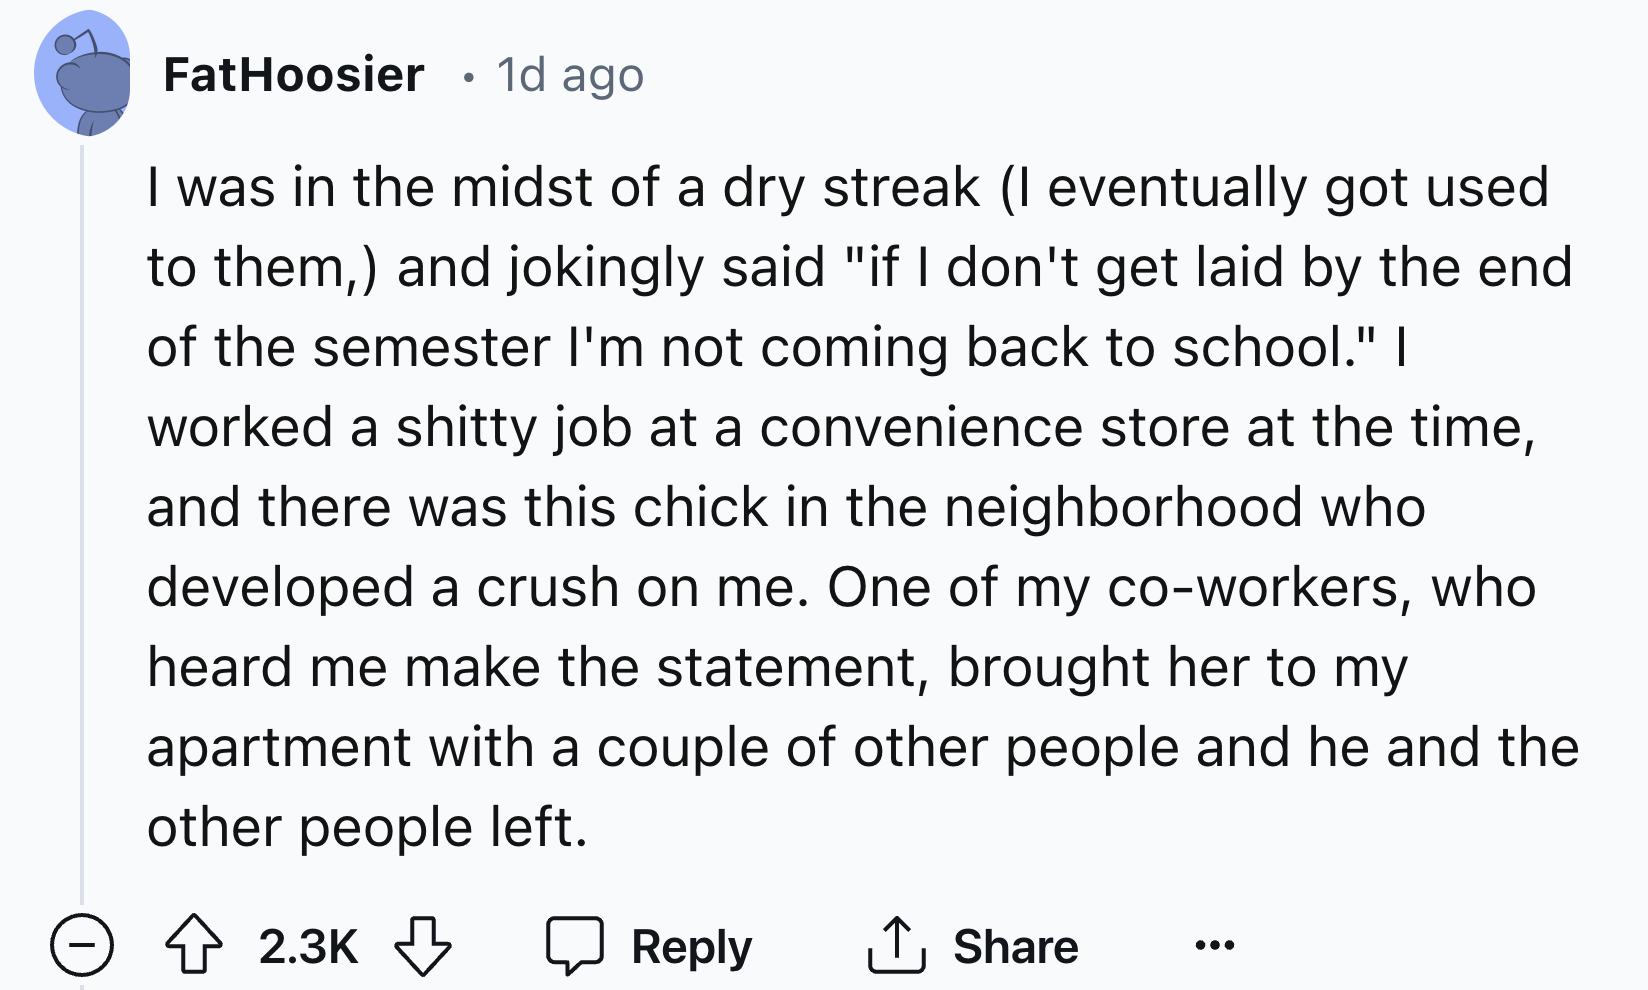 screenshot - FatHoosier 1d ago I was in the midst of a dry streak I eventually got used to them, and jokingly said "if I don't get laid by the end of the semester I'm not coming back to school." I worked a shitty job at a convenience store at the time, an